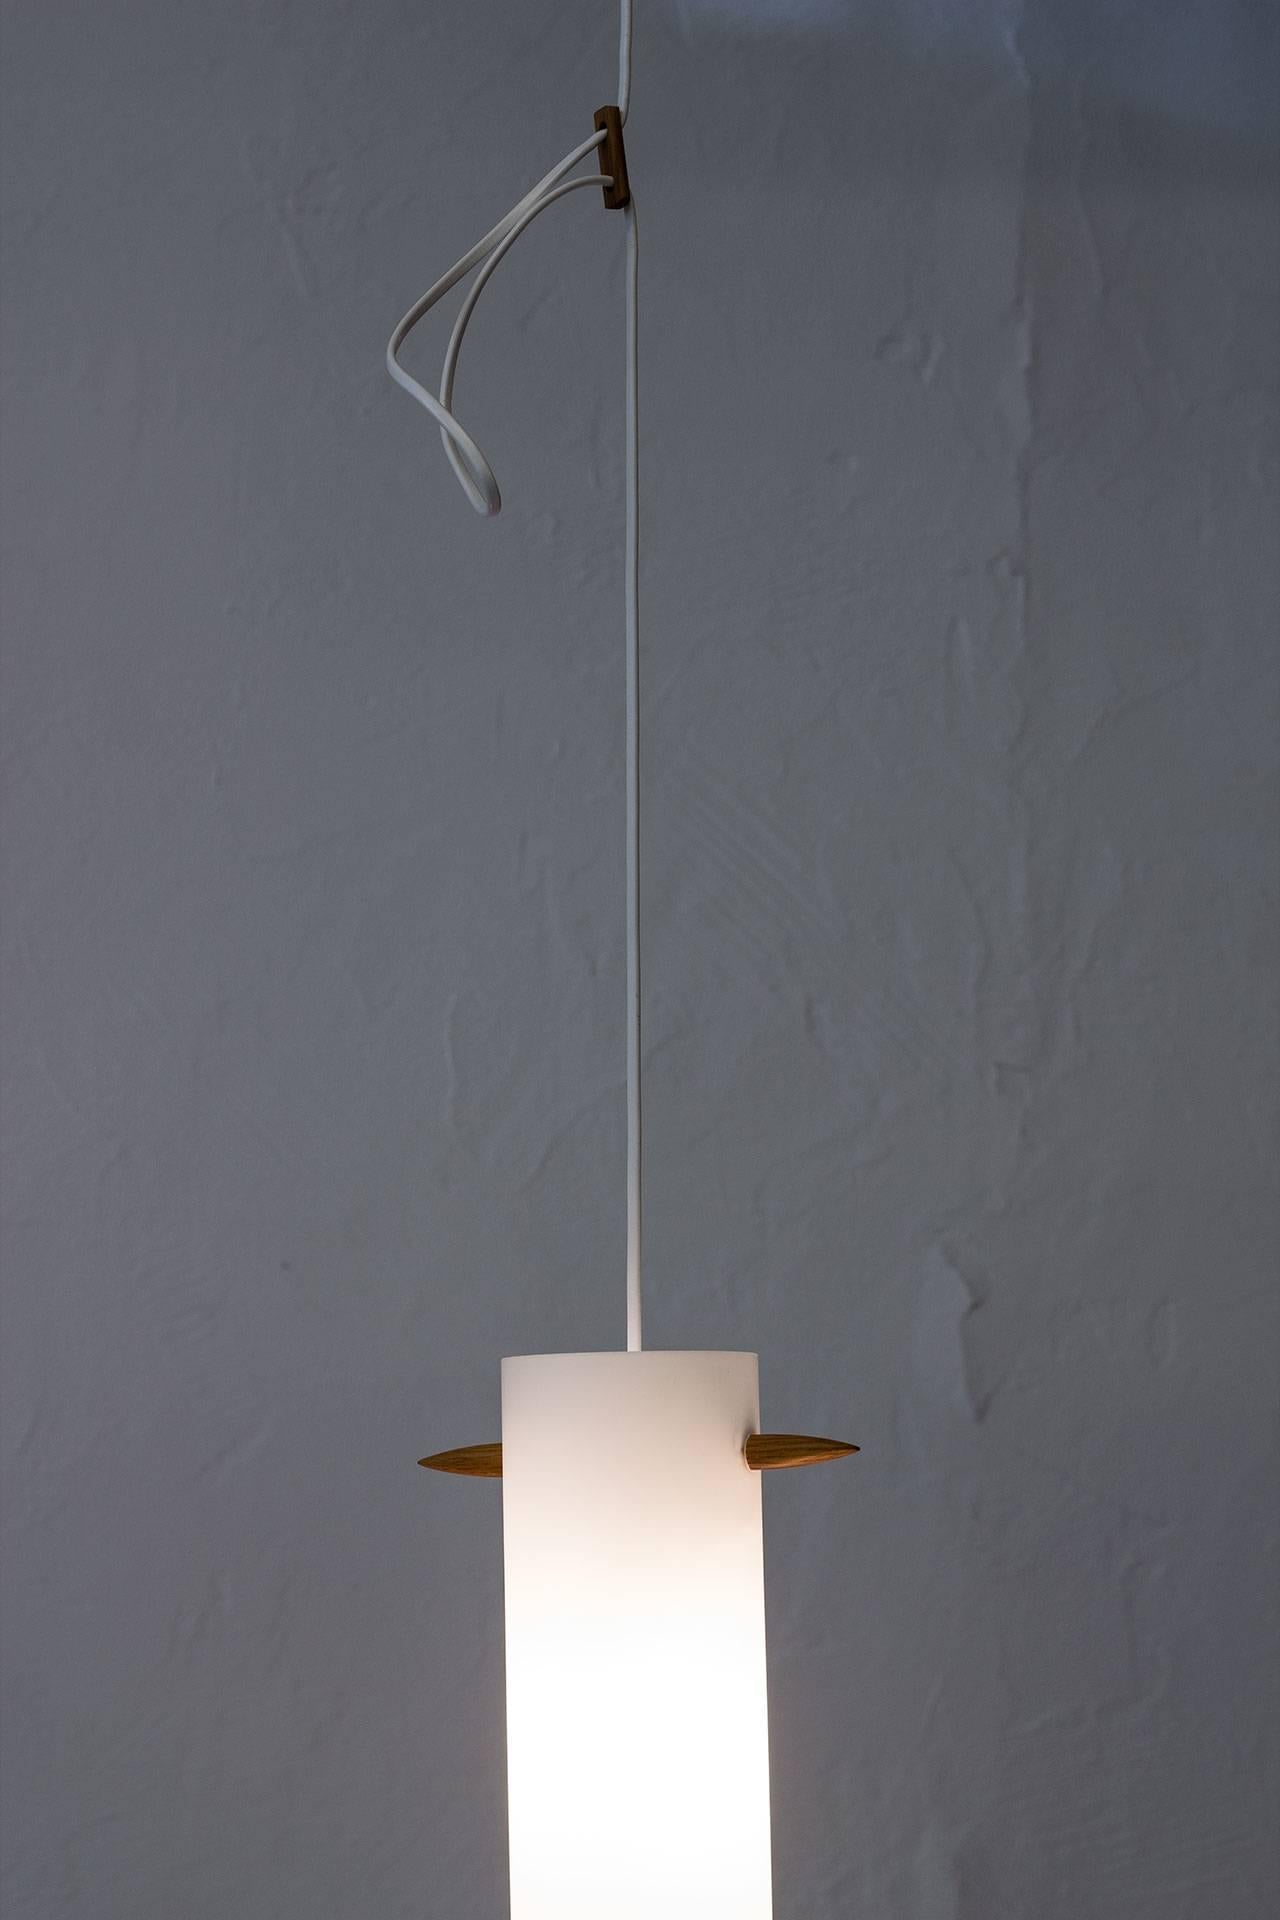 Rare ”535 pendant lamp designed by Uno & Östen Kristiansson for their own company Luxus at Vittsjö, Sweden during the 1950s. Opaline glass and solid oak fitting. New electricity. Excellent condition with minor wear related to age.